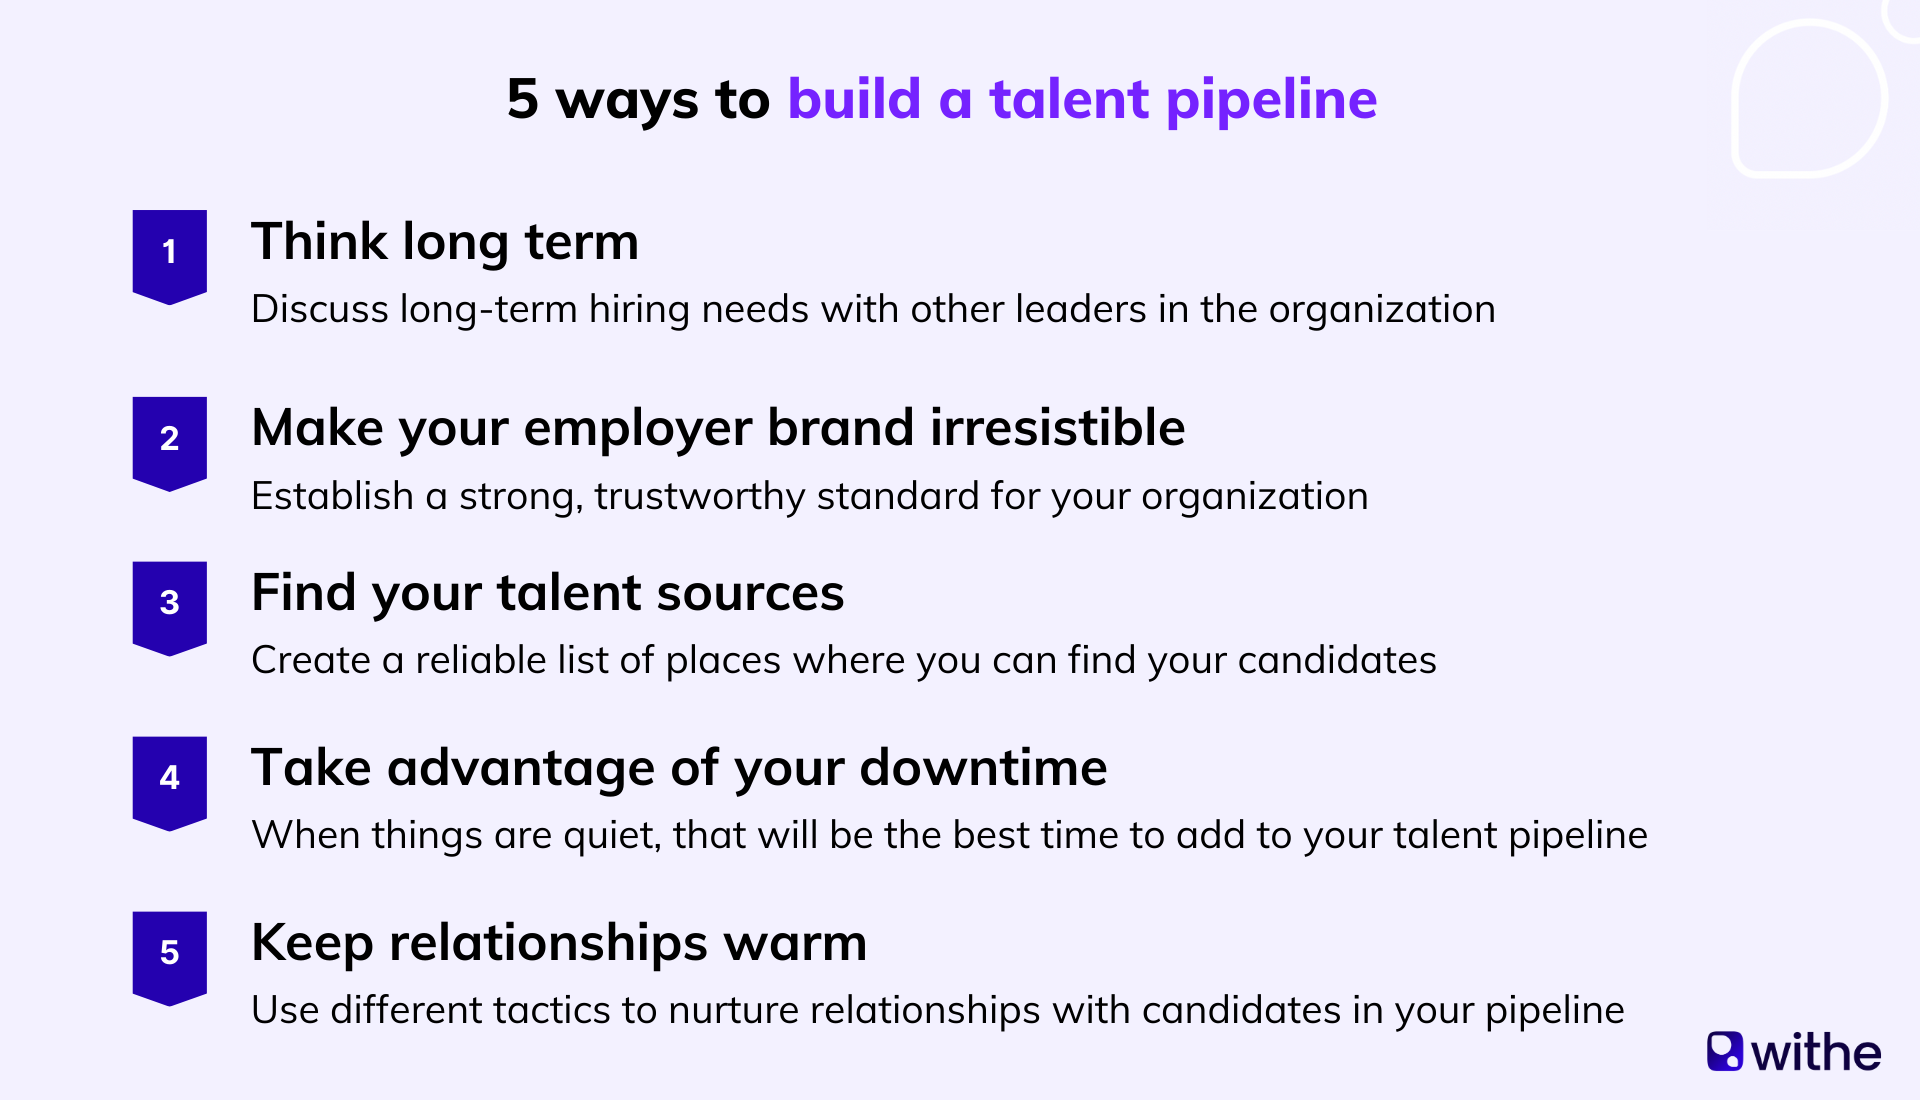 5 ways to build a talent pipeline